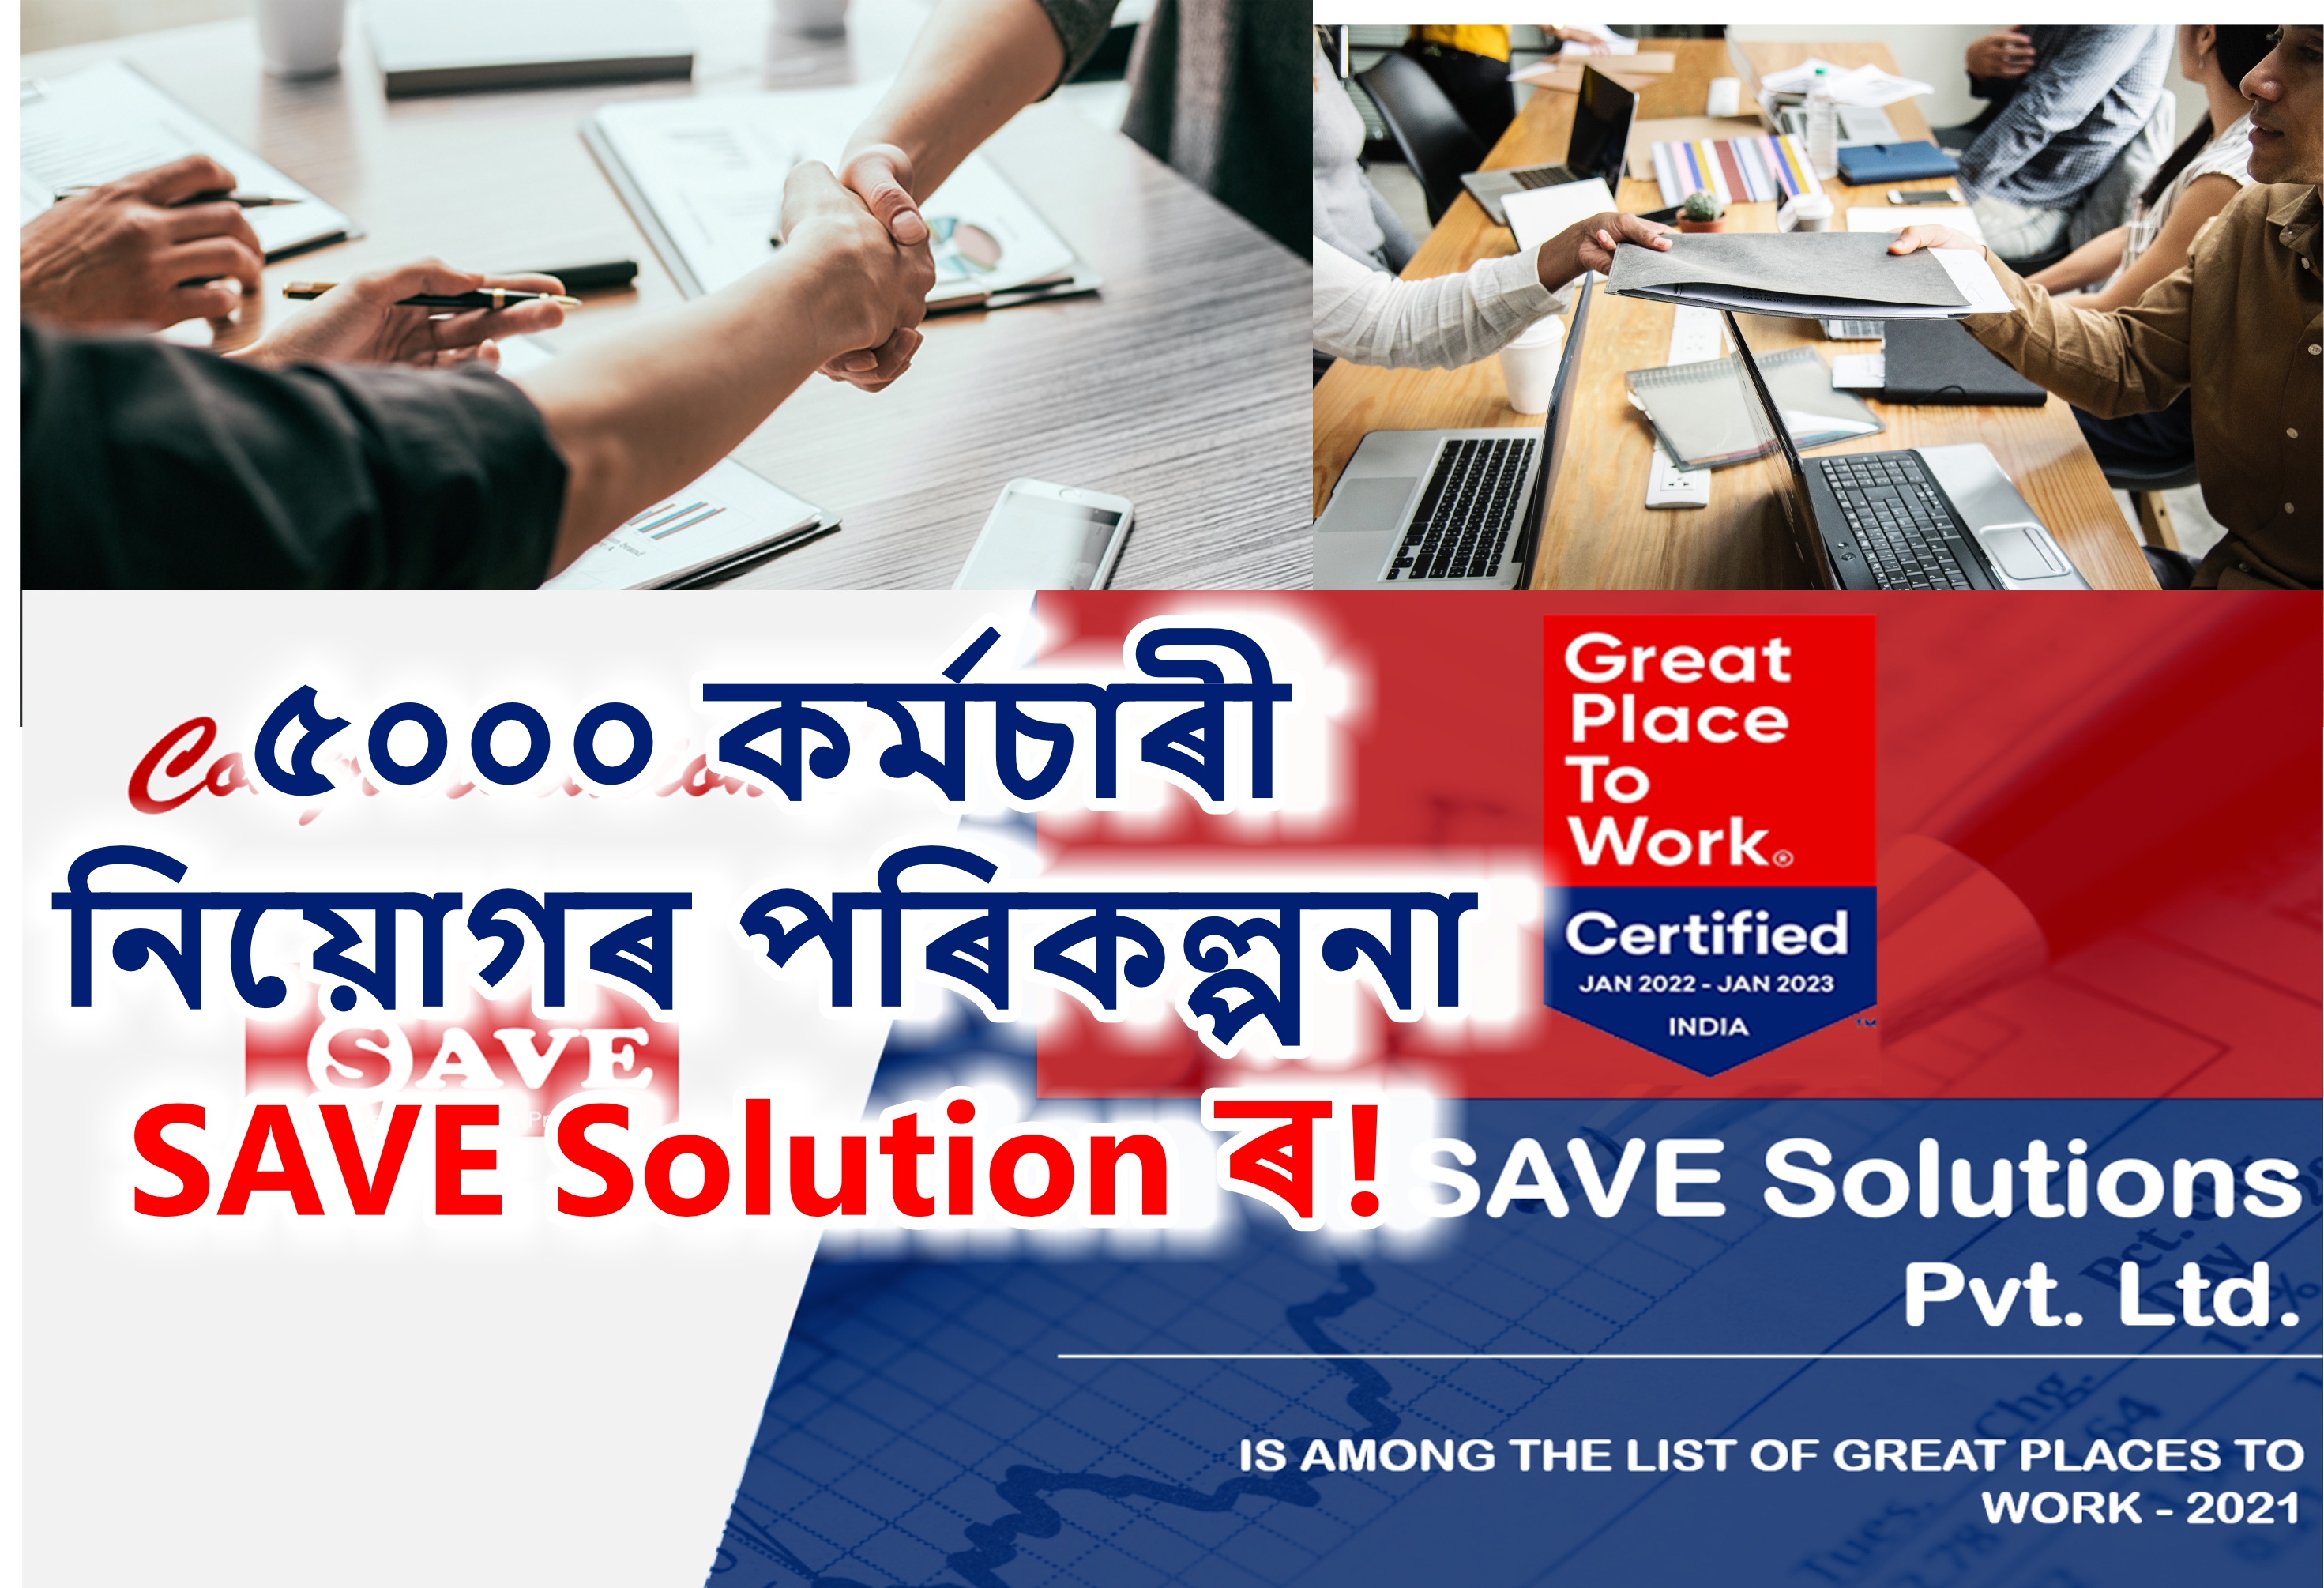 SAVE Solutions plans to hire 5000 employees this year